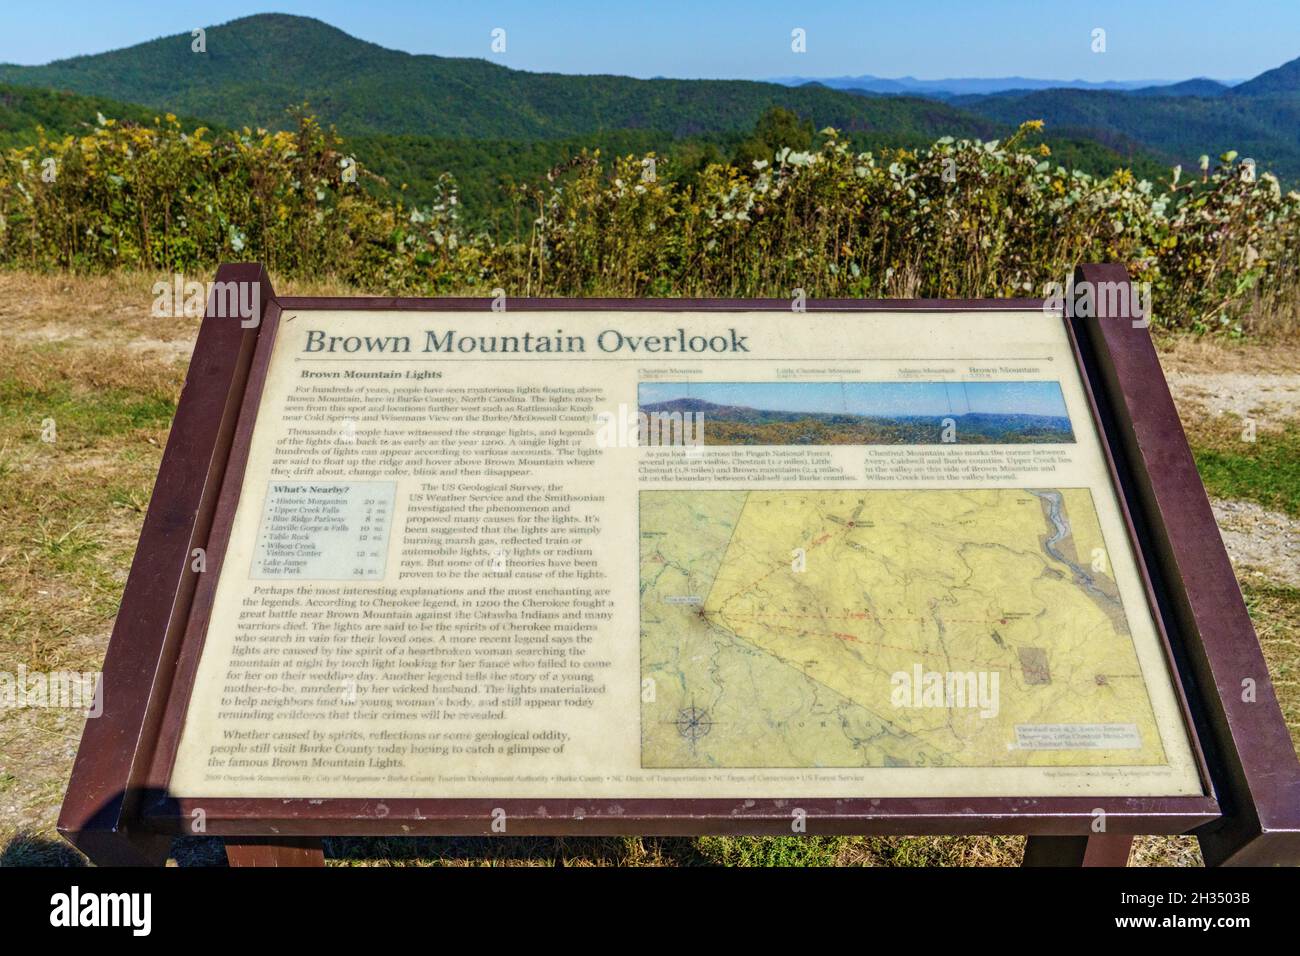 Information sign about the Brown Mountain Lights at the Brown Mountain View Overlook on Highway 181 in Newland, North Carolina. Stock Photo